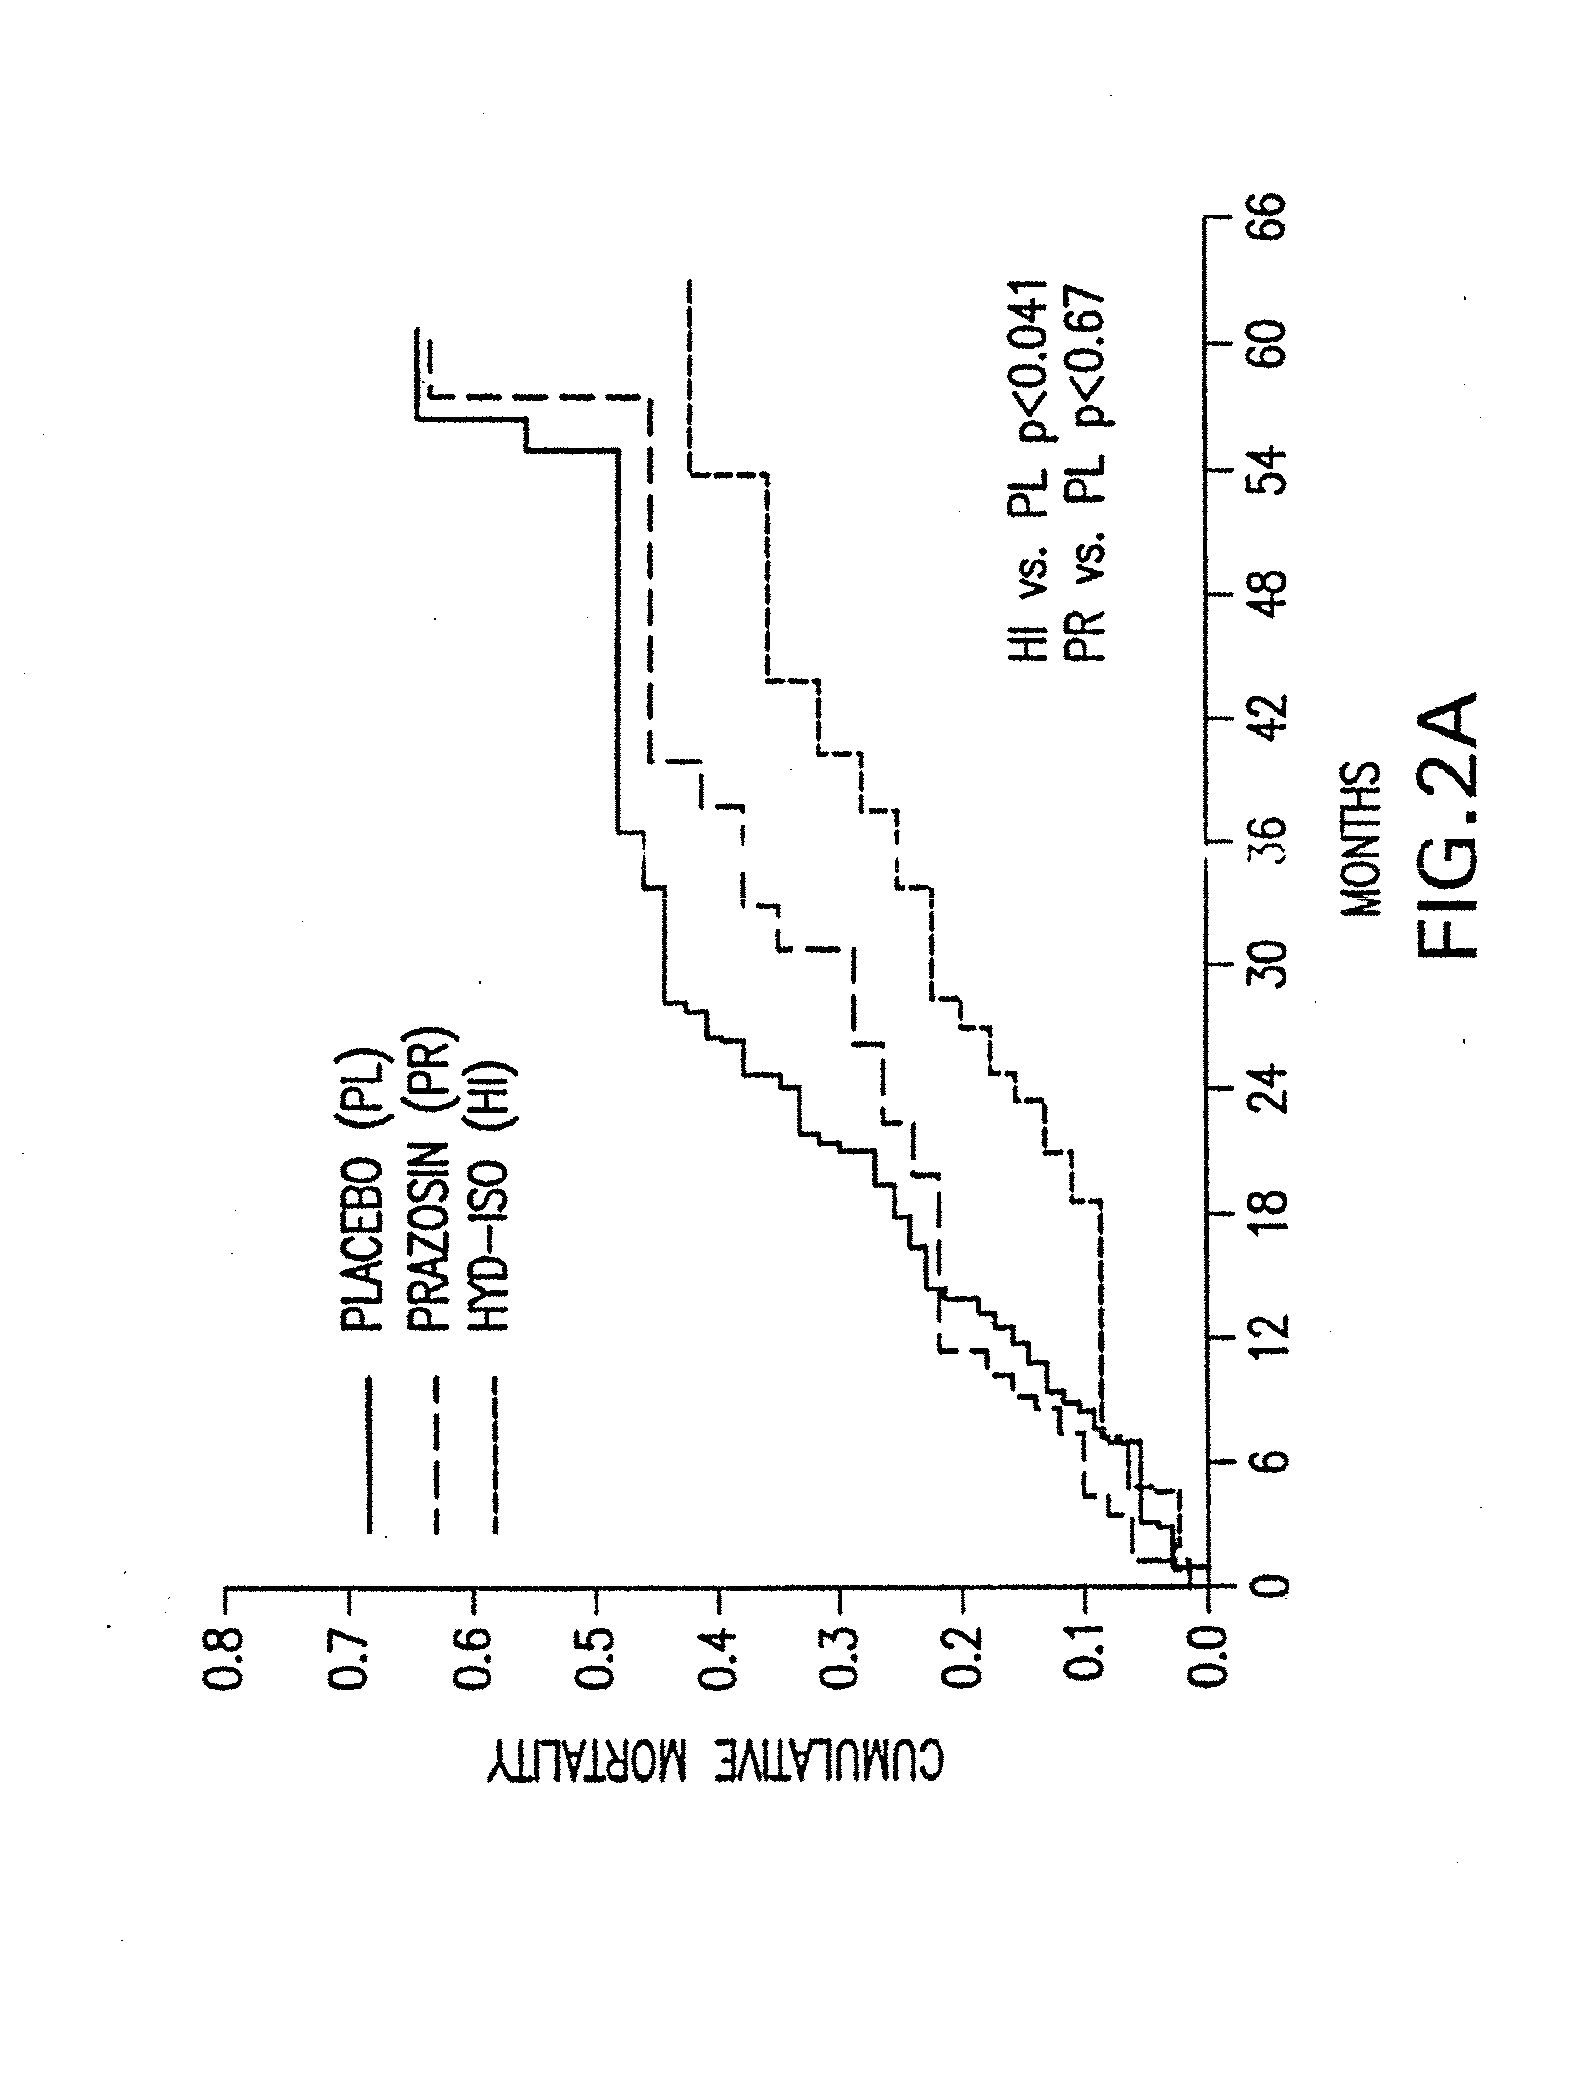 Kits of hydralazine compounds and isosorbide dinitrate and/or isosorbide mononitrate